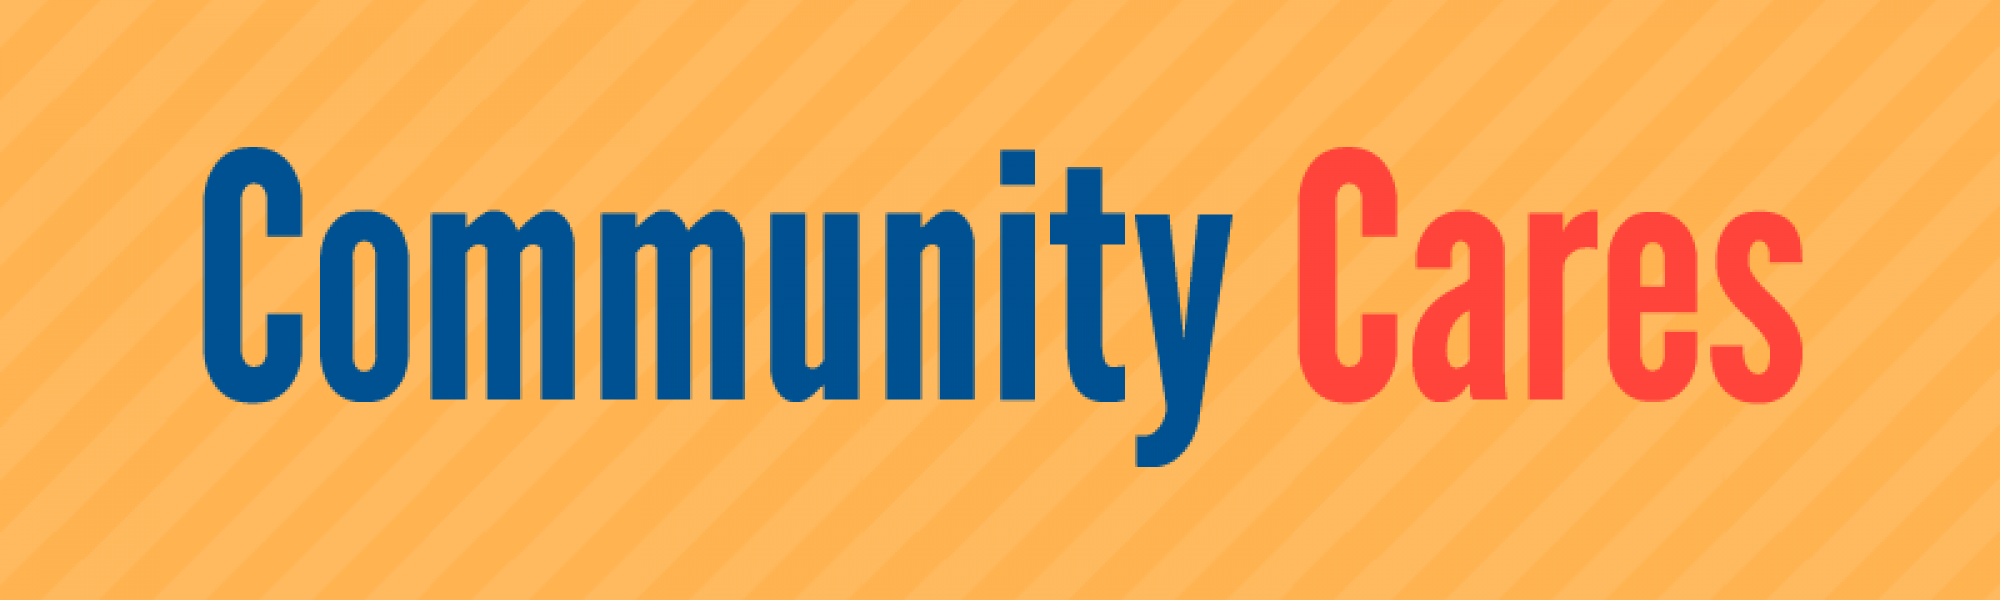 Community Cares banner, text in blue and red on a yellow-striped background.